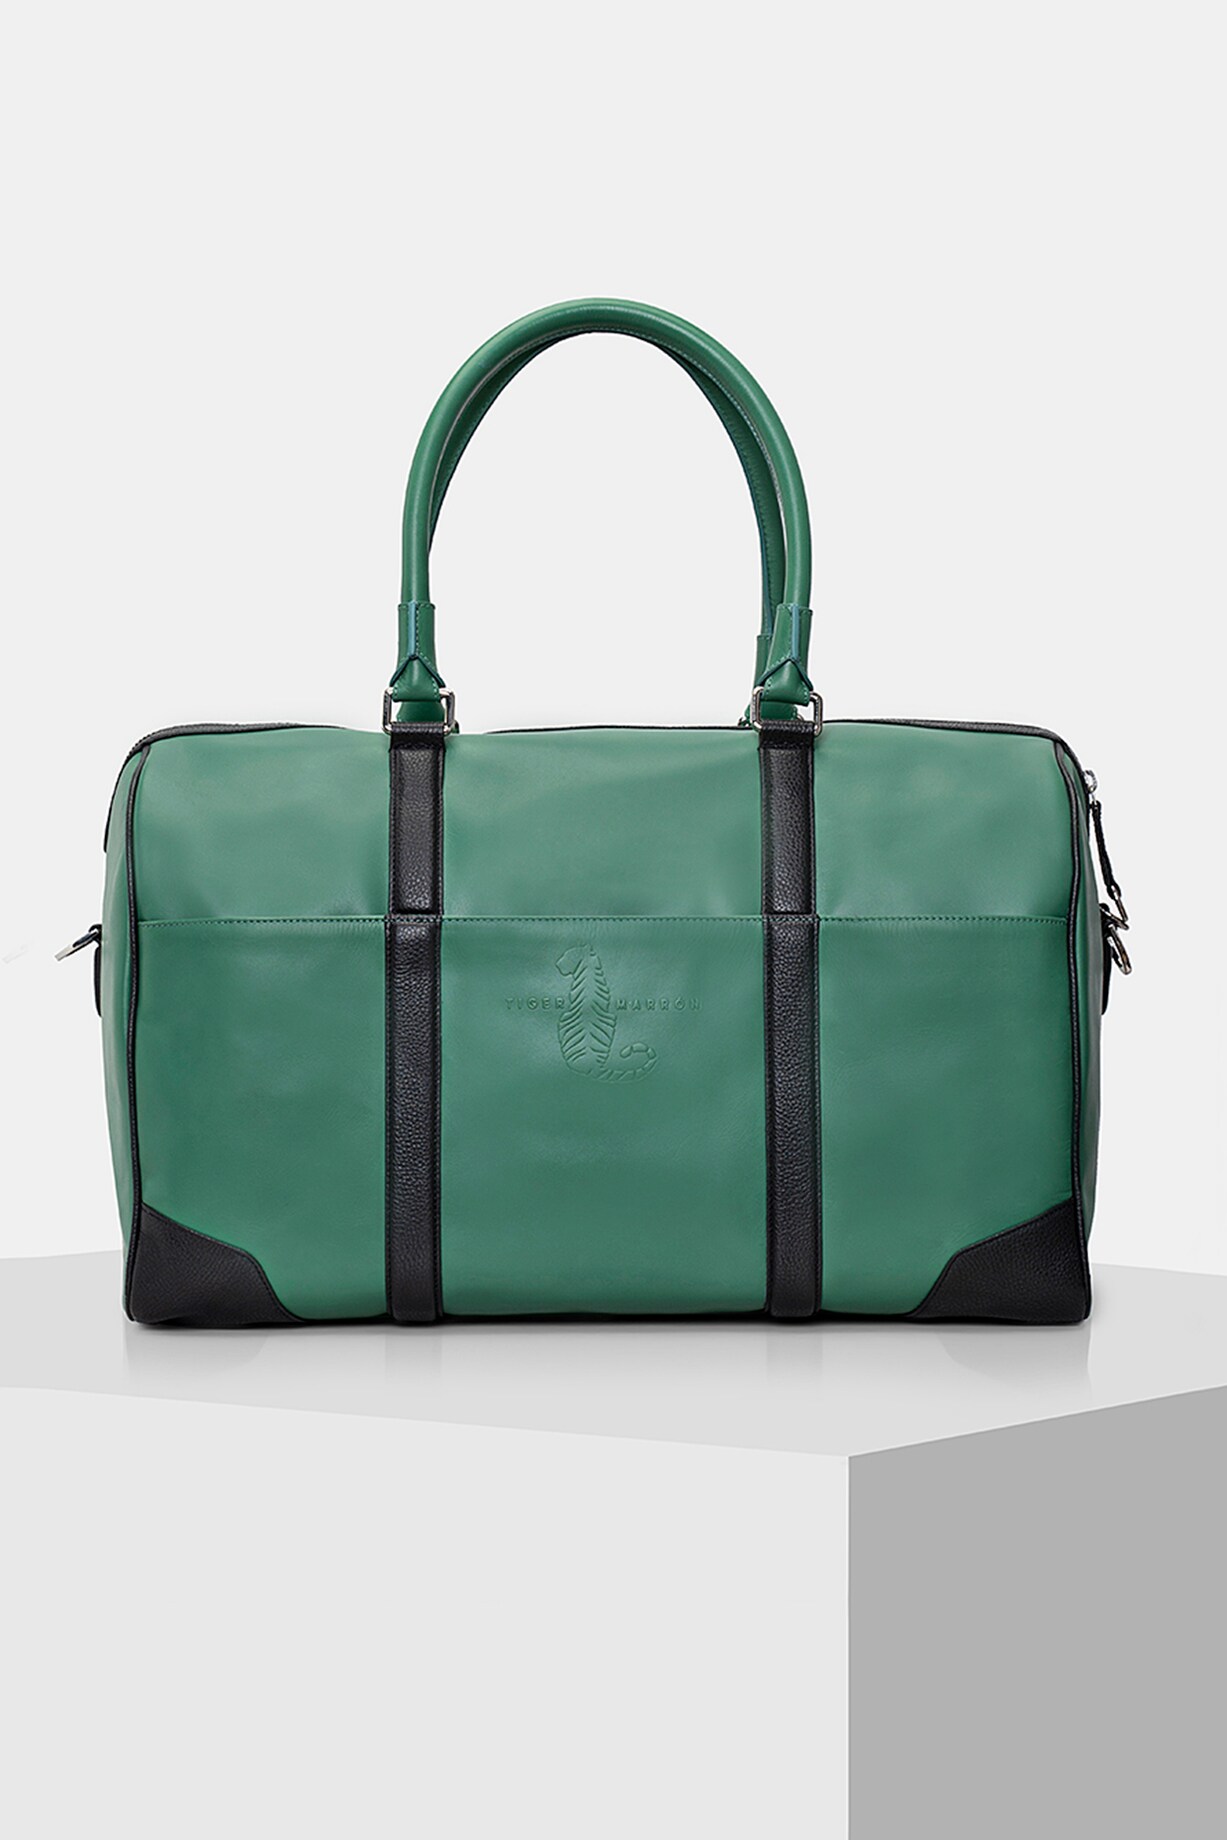 Green & Black Handcrafted Duffle Bag by Tiger Marron